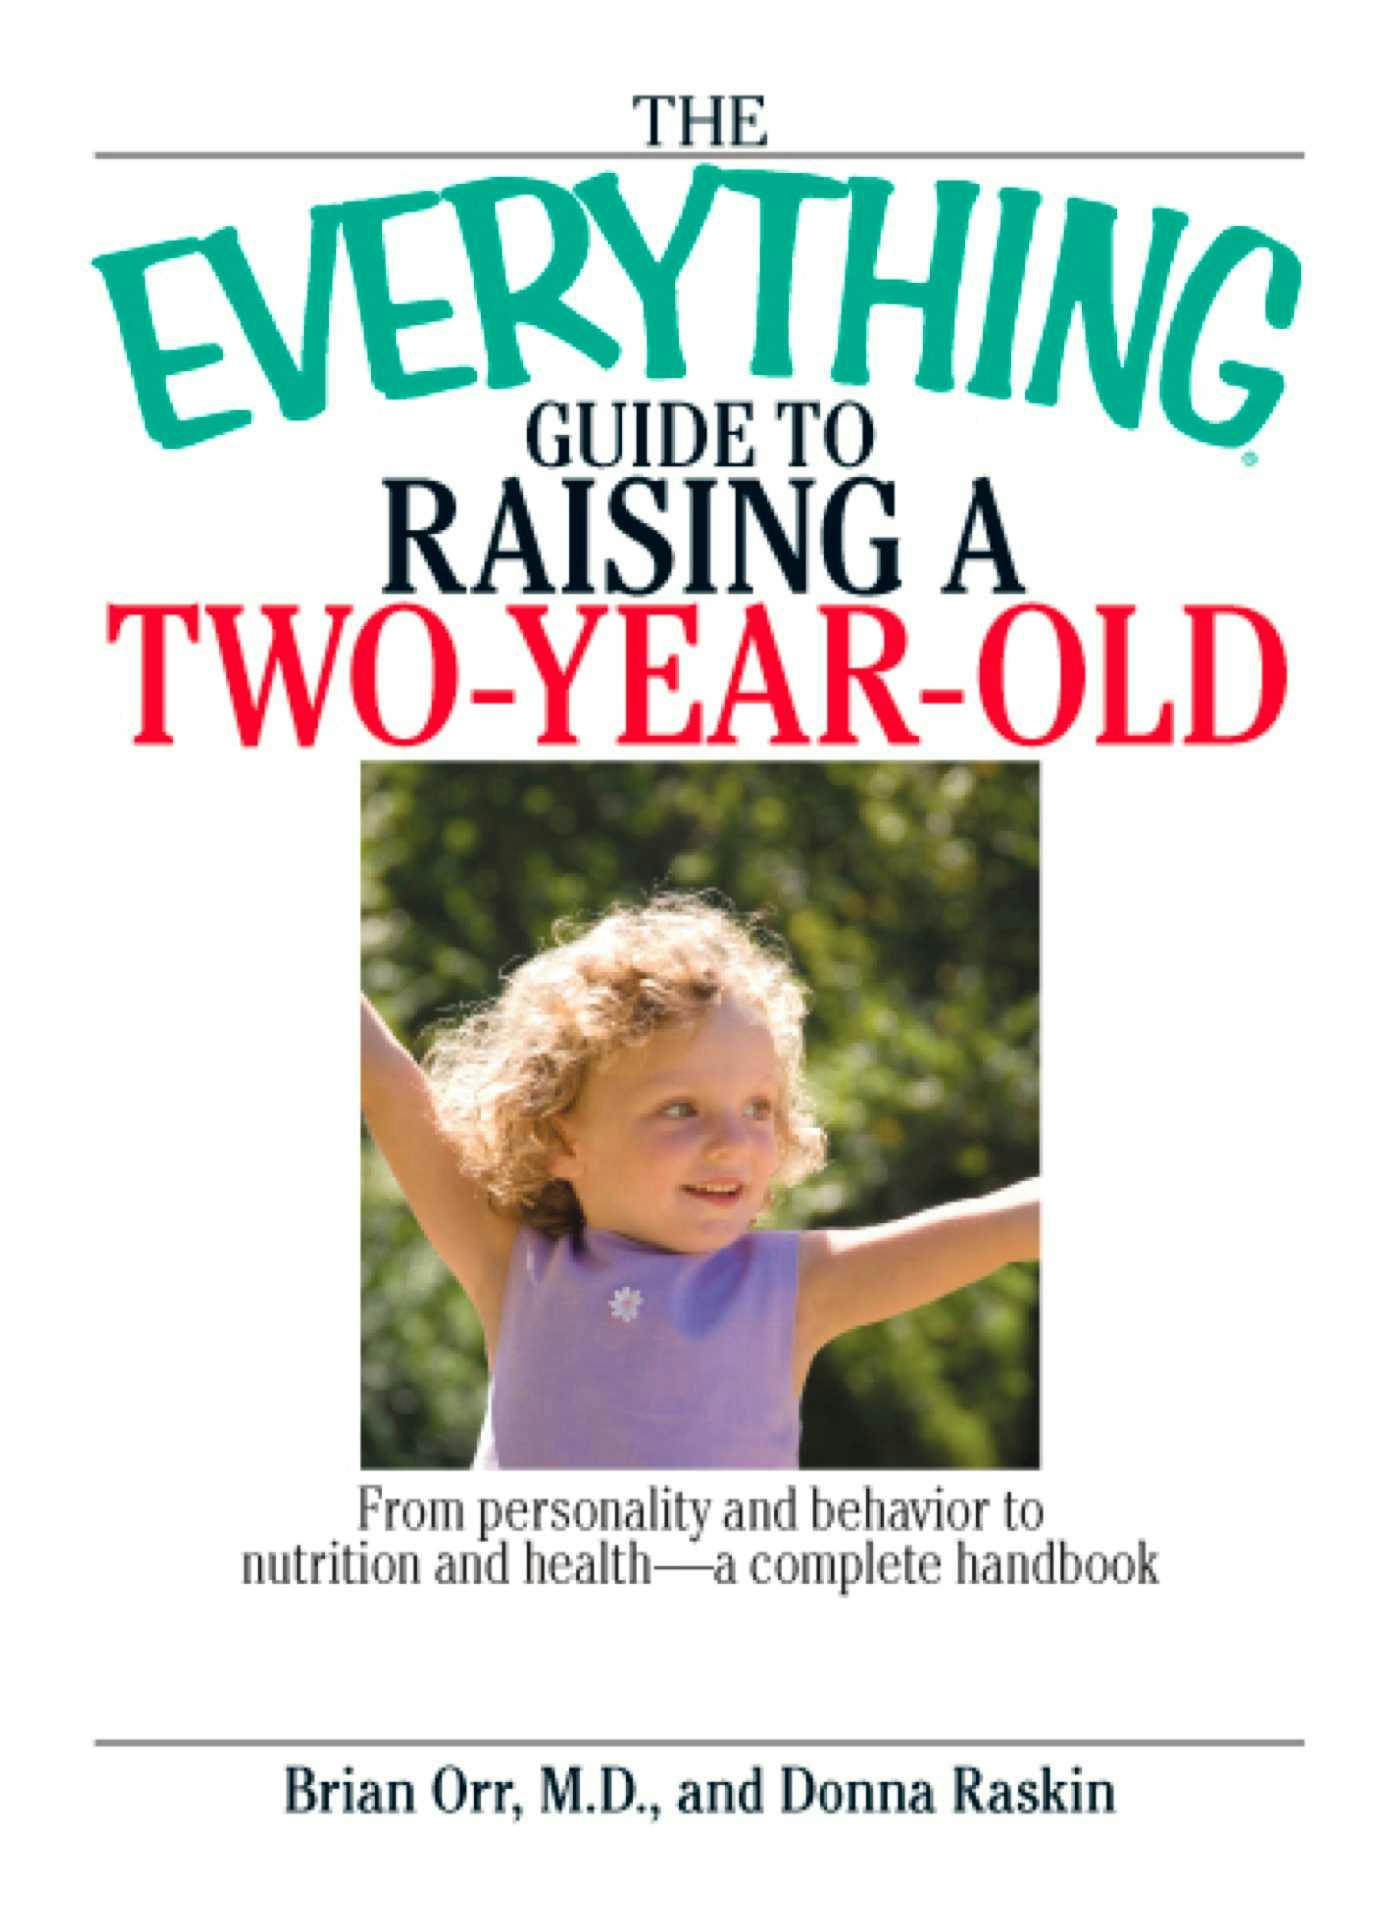 The Everything Guide To Raising A Two-Year-Old: From Personality And Behavior to Nutrition And Health--a Complete Handbook - Donna Raskin, Brian Orr